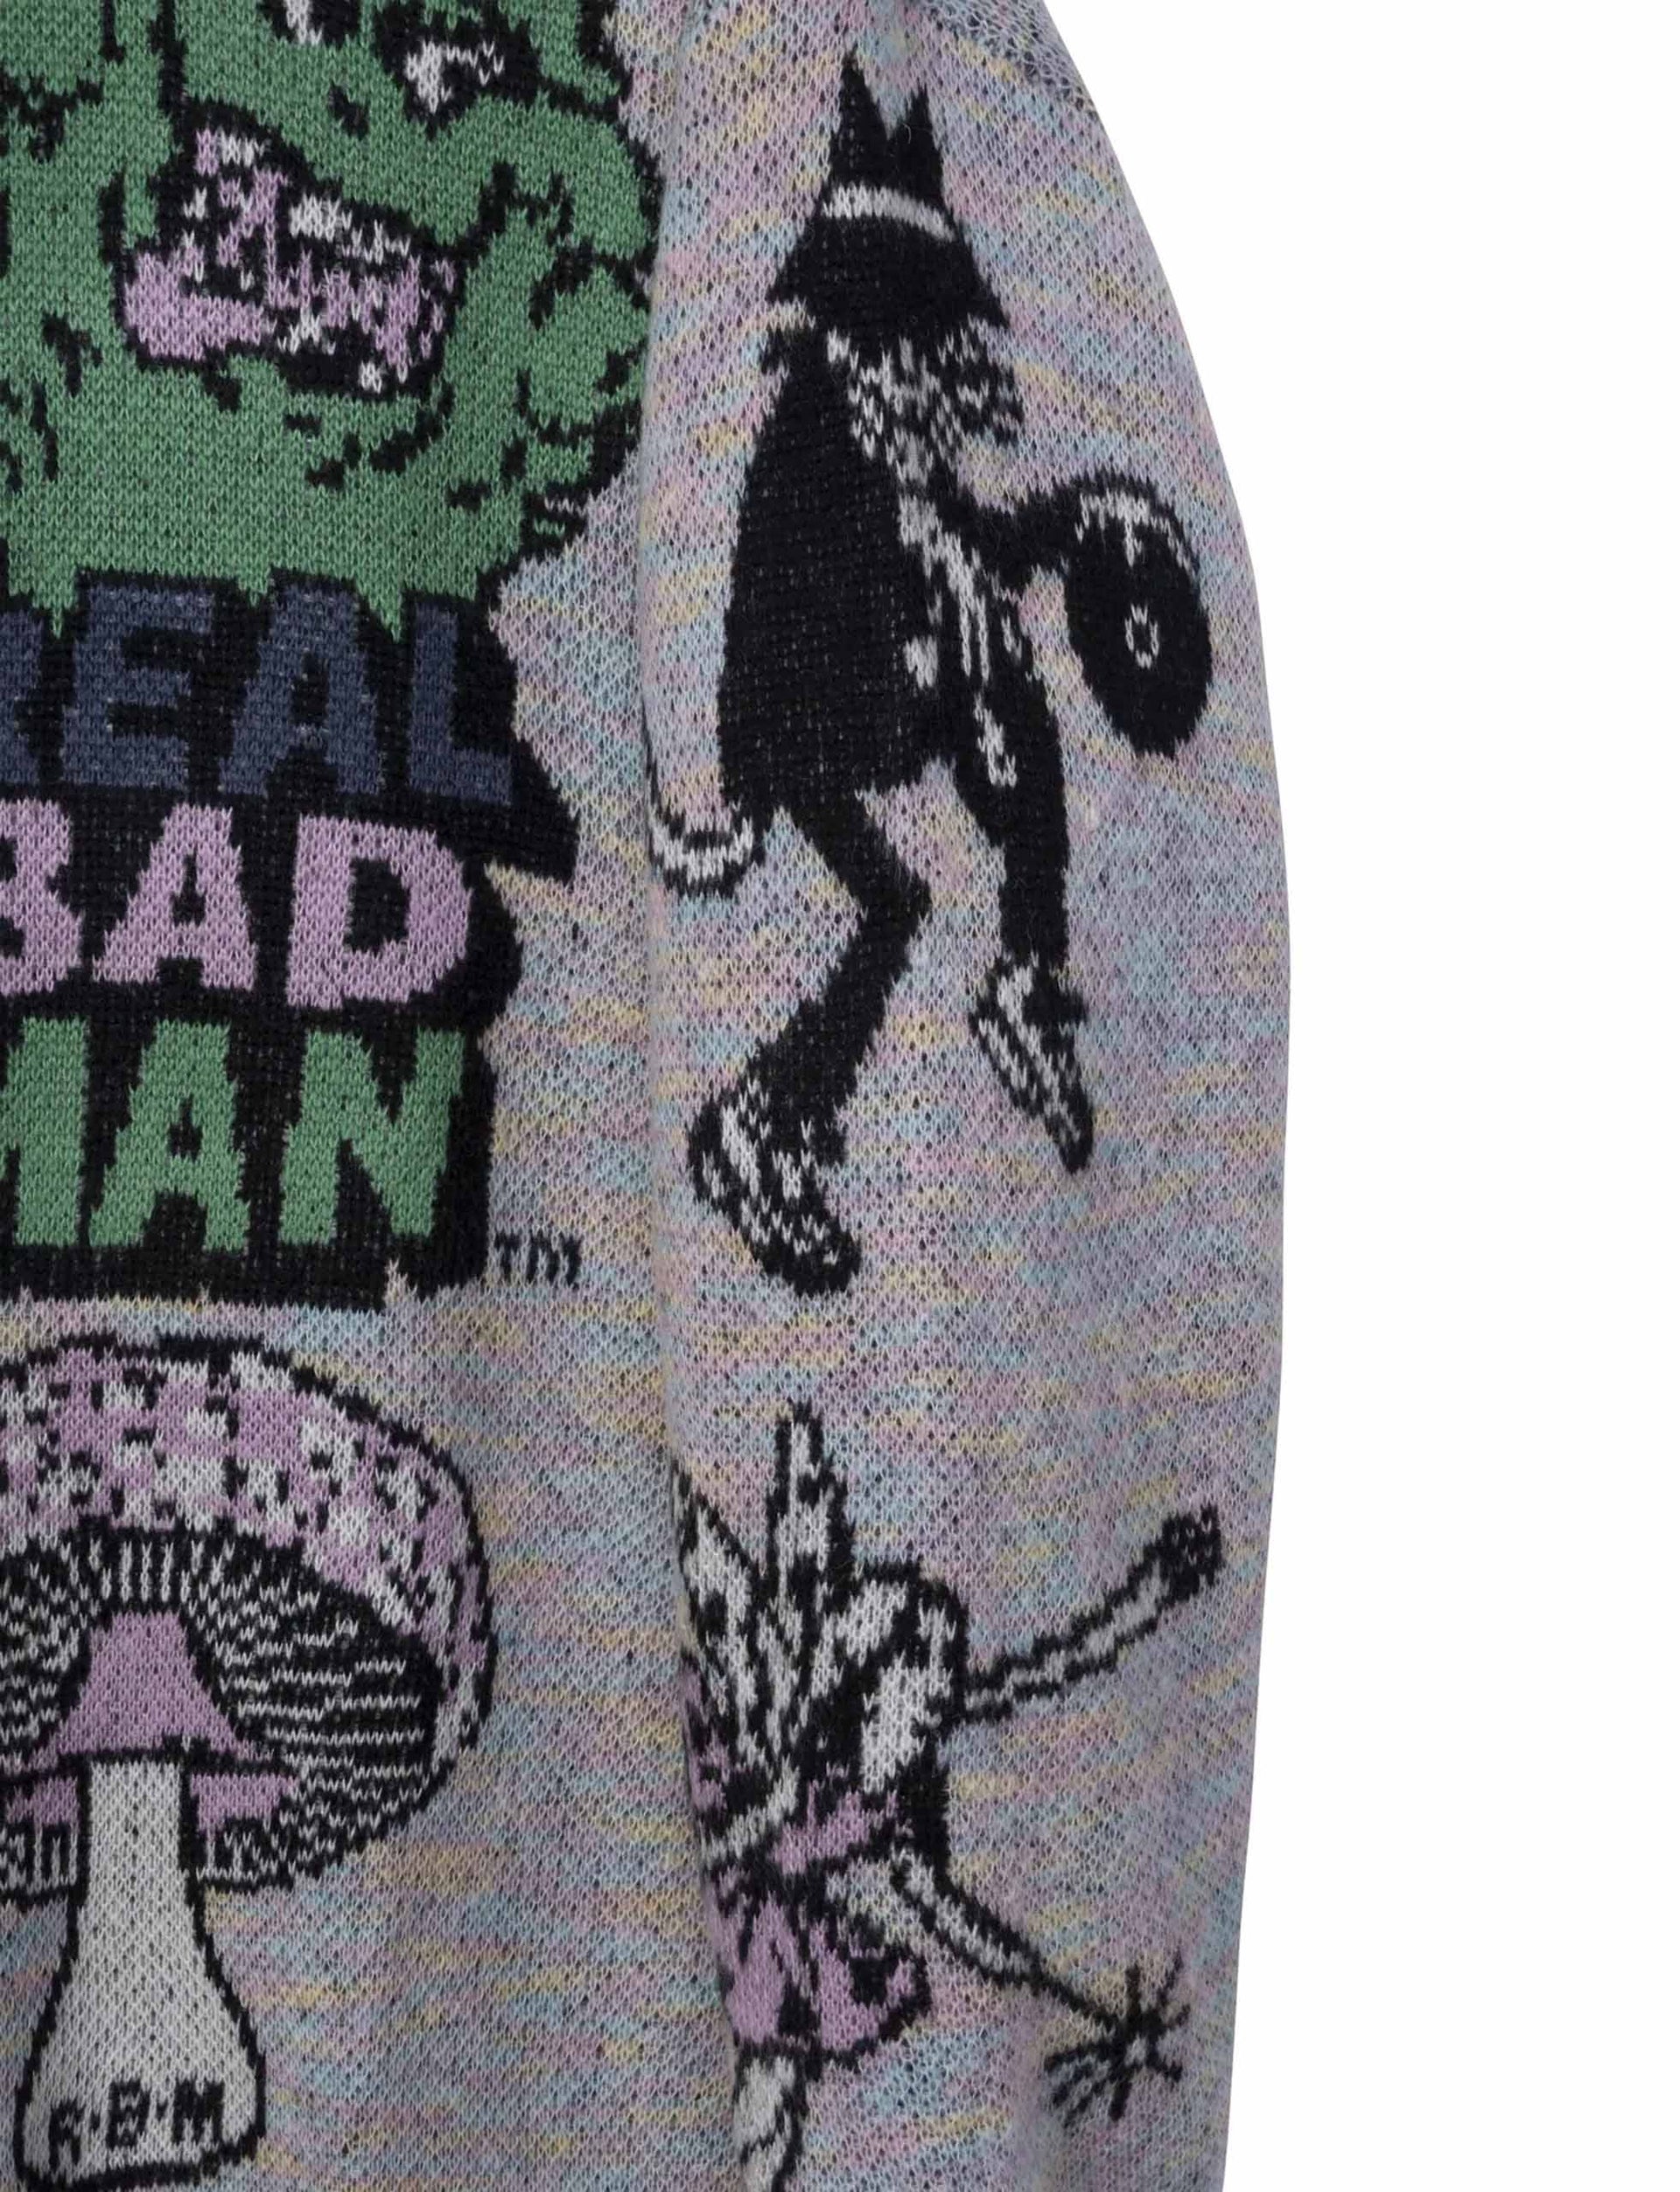 REAL BAD MAN TOO MANY GRAPHICS SWEATER